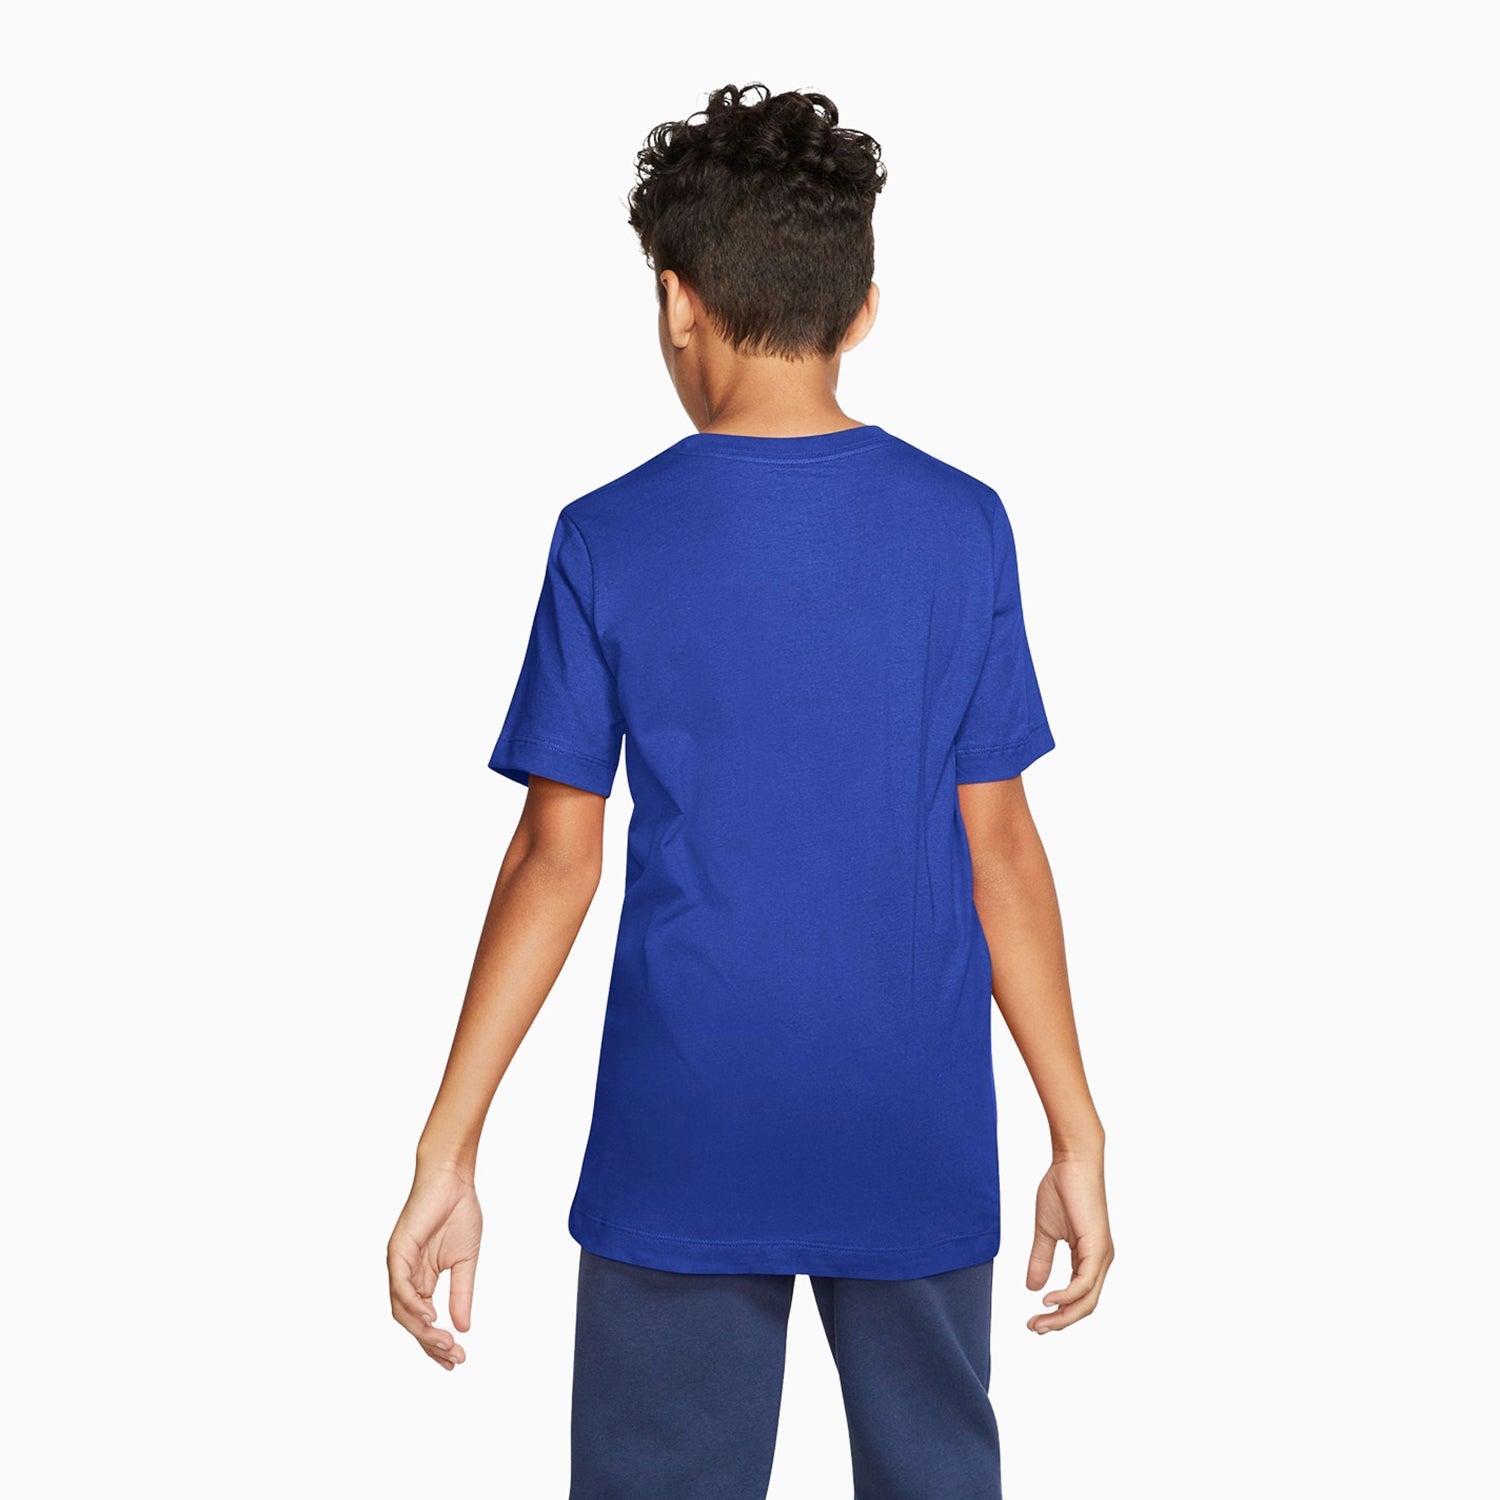 nike-kids-sportswear-t-shirt-and-short-outfit-ar5252-481-ck0509-481